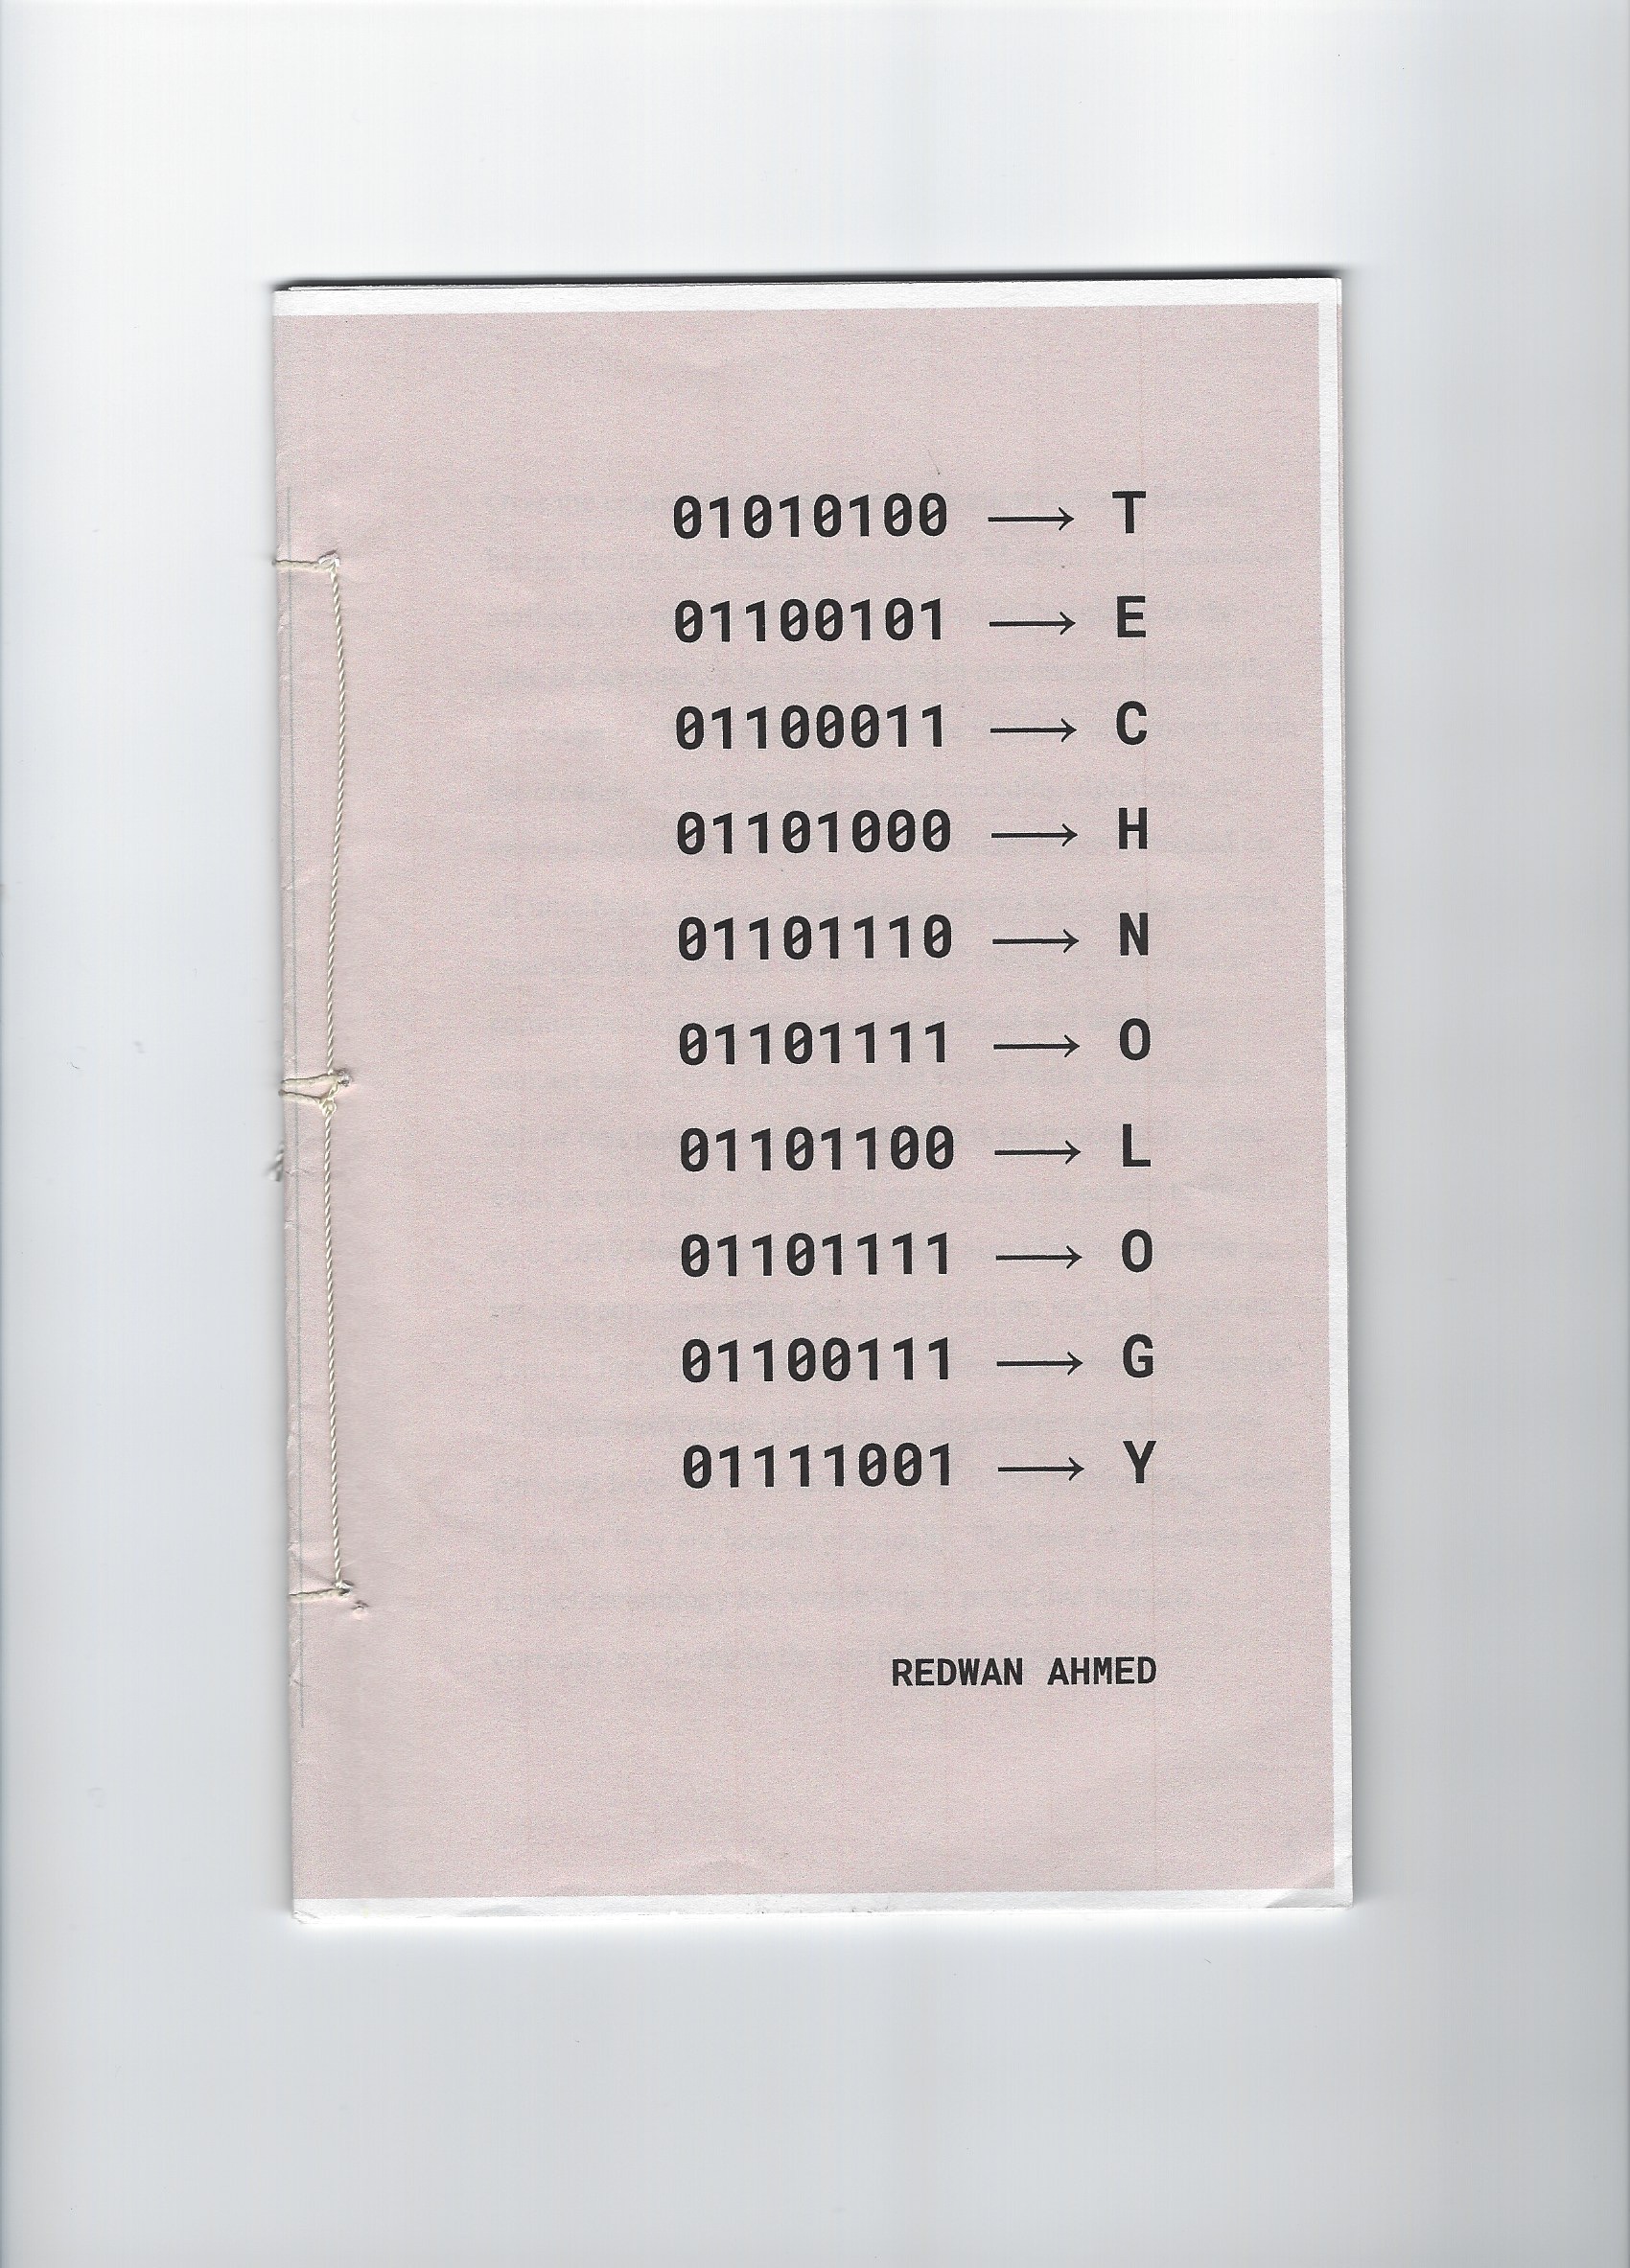 Front Cover: The front cover page that displays the title of the work in both binary code and english. The authors name is presented towards the bottom of the page.